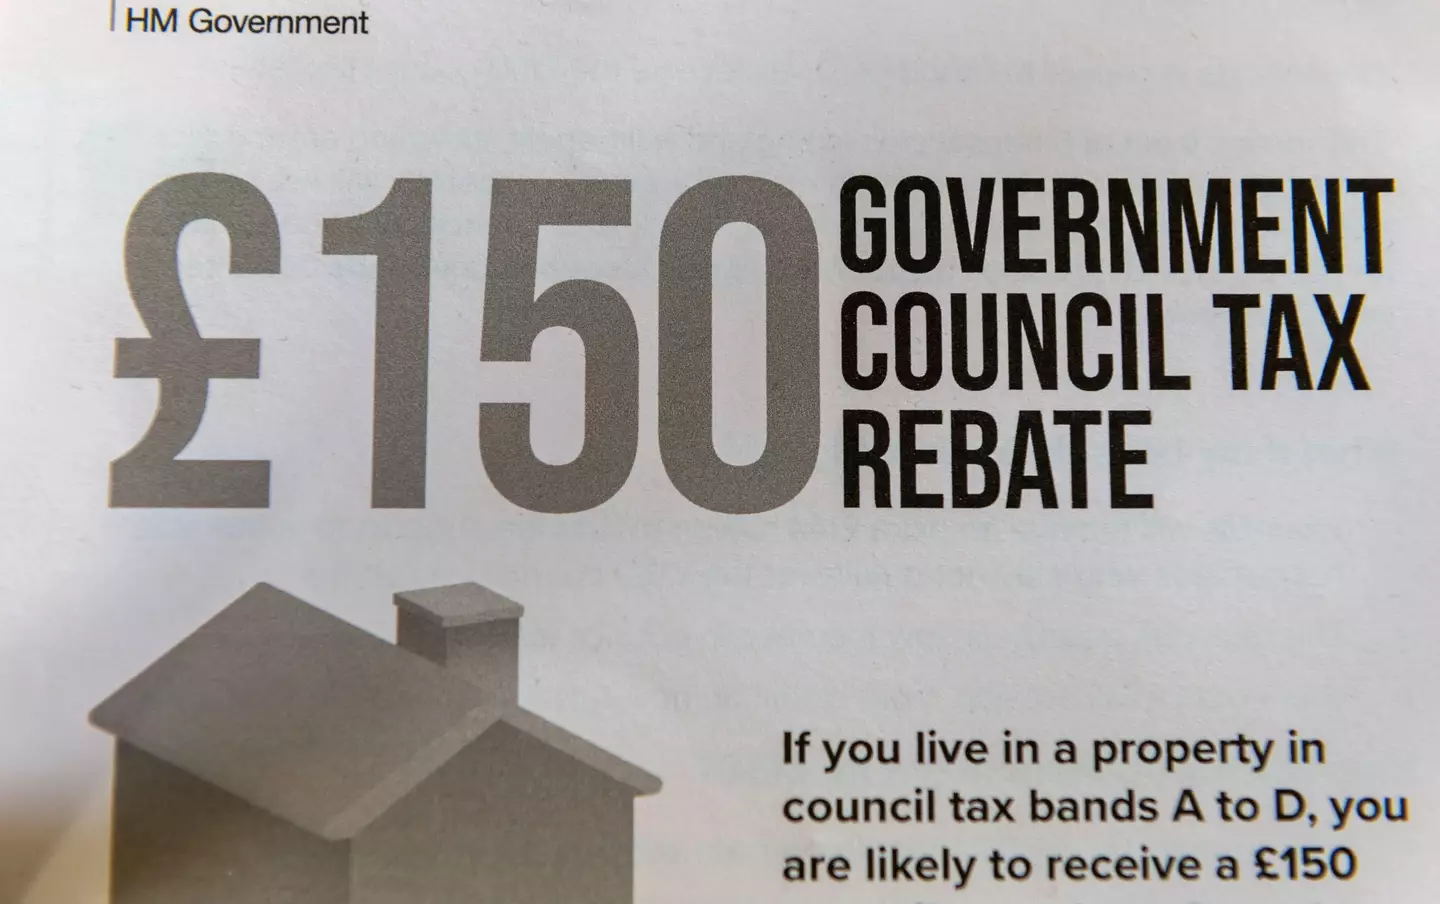 Councils have revealed a £150 council tax rebate to help households with the cost of living crisis.